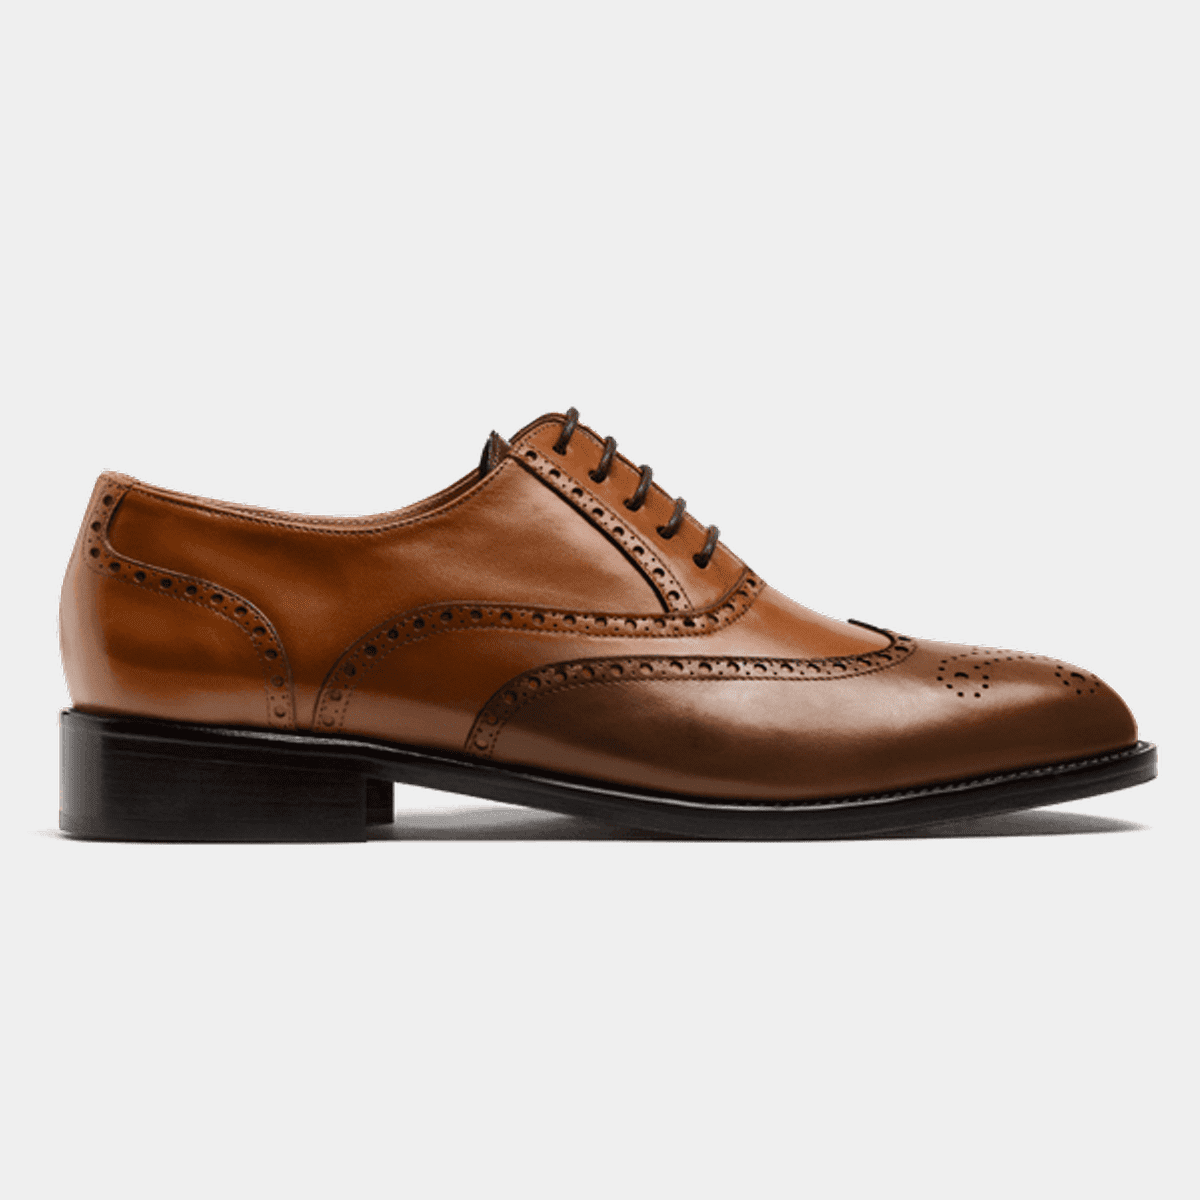 Full Brogue shoes - brown italian calf leather